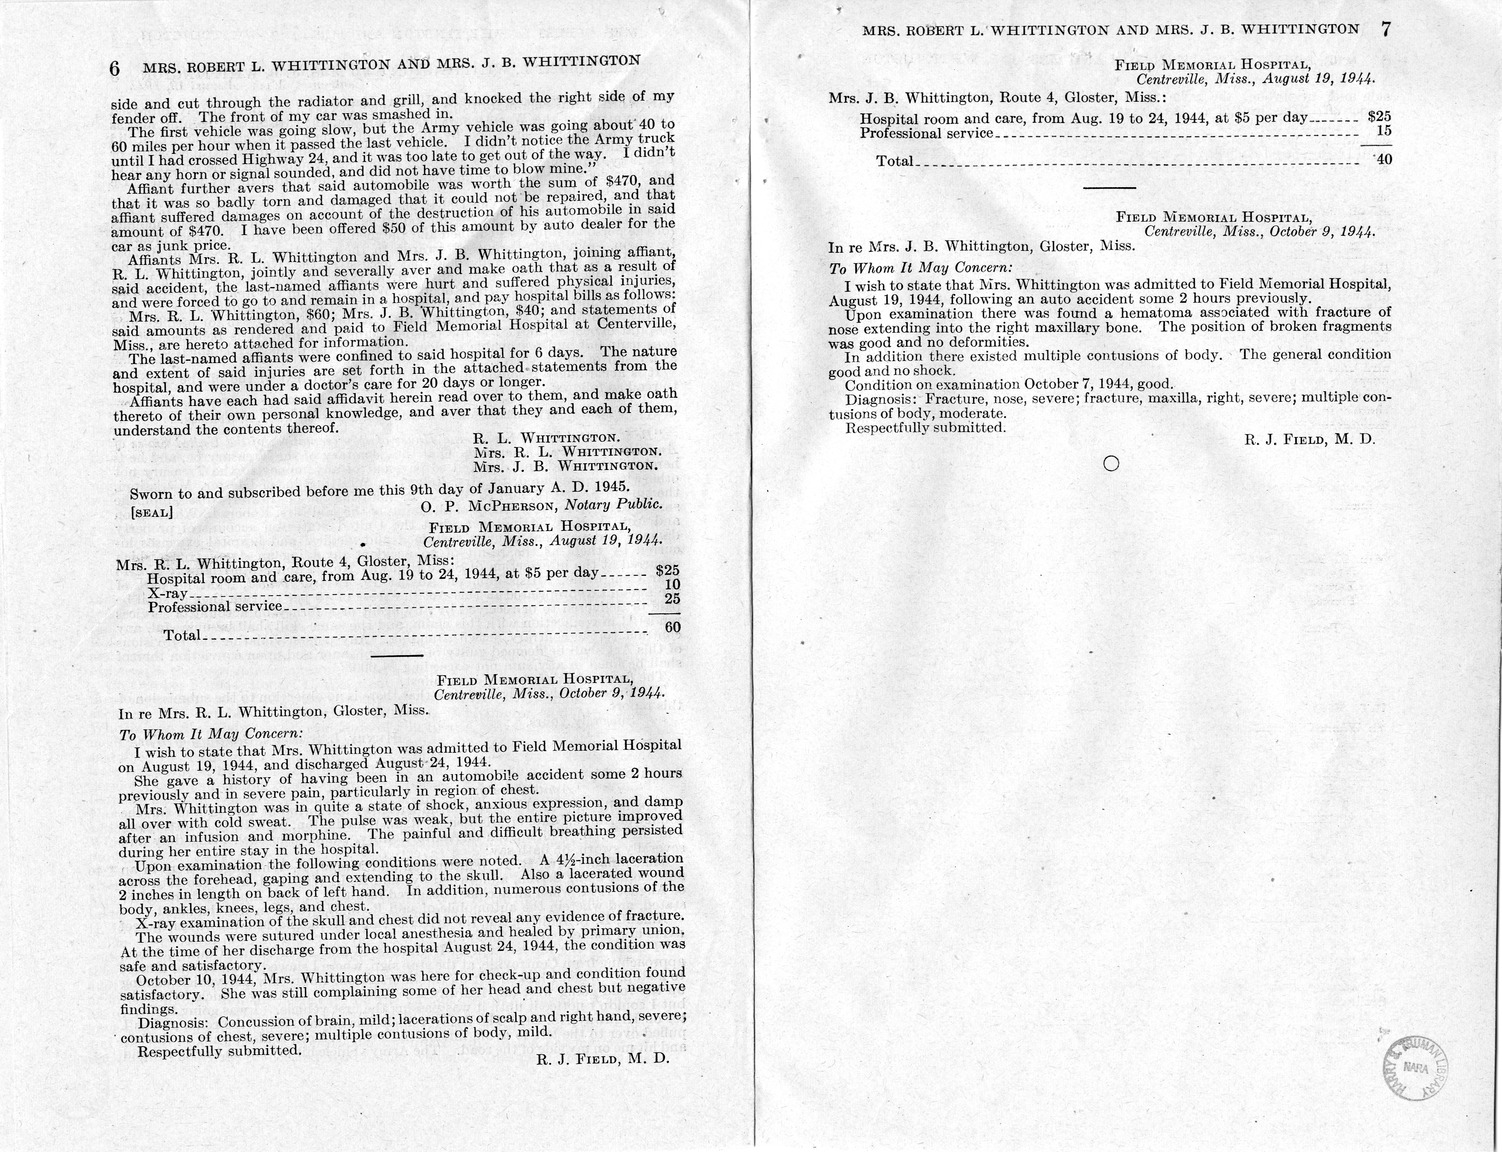 Memorandum from Frederick J. Bailey to M. C. Latta, H.R. 1882, For the Relief of R. L. Whittington, Mrs. R. L. Whittington, and Mrs. J. B. Whittington, with Attachments